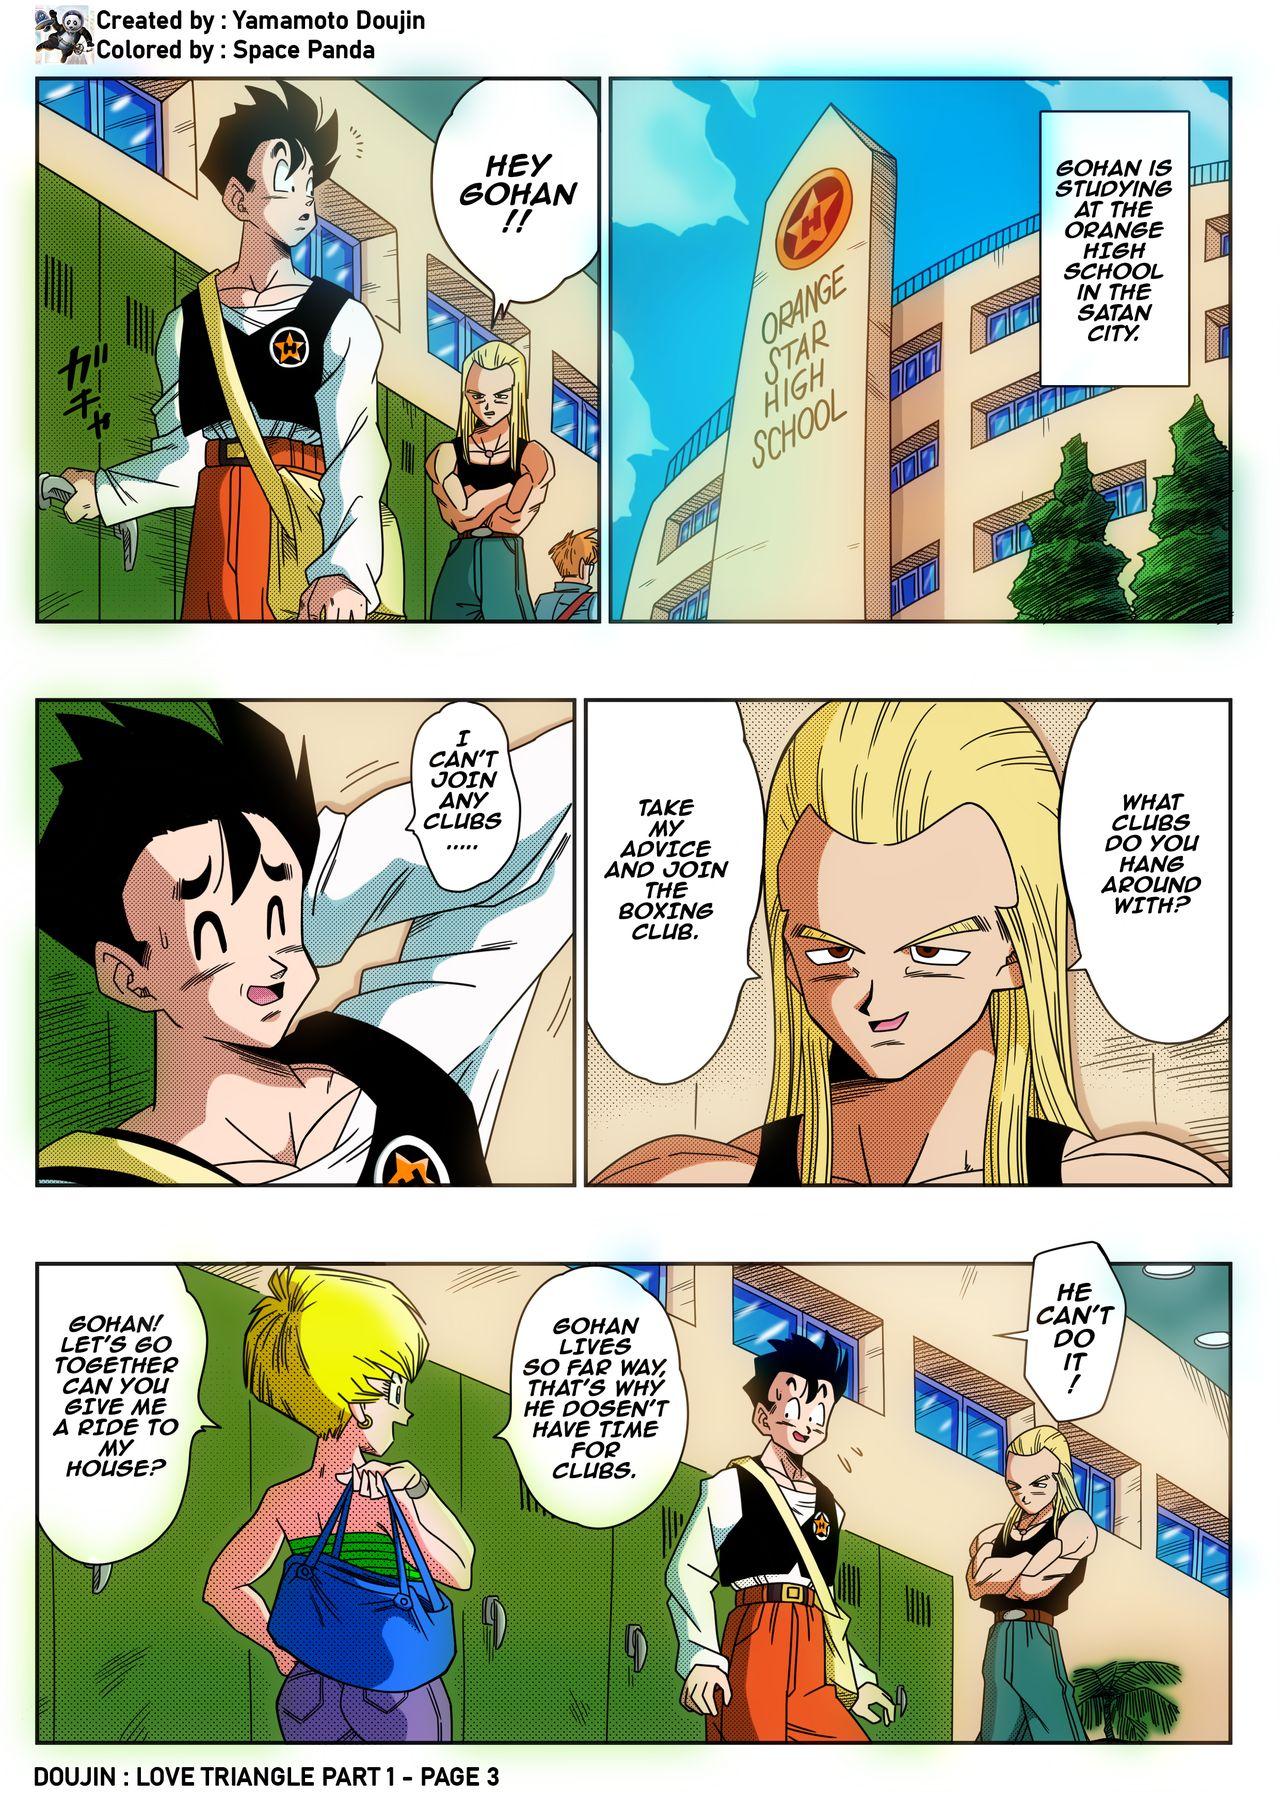 Babe Love Triangle - Part 1 - Dragon ball z Pawg - Page 3